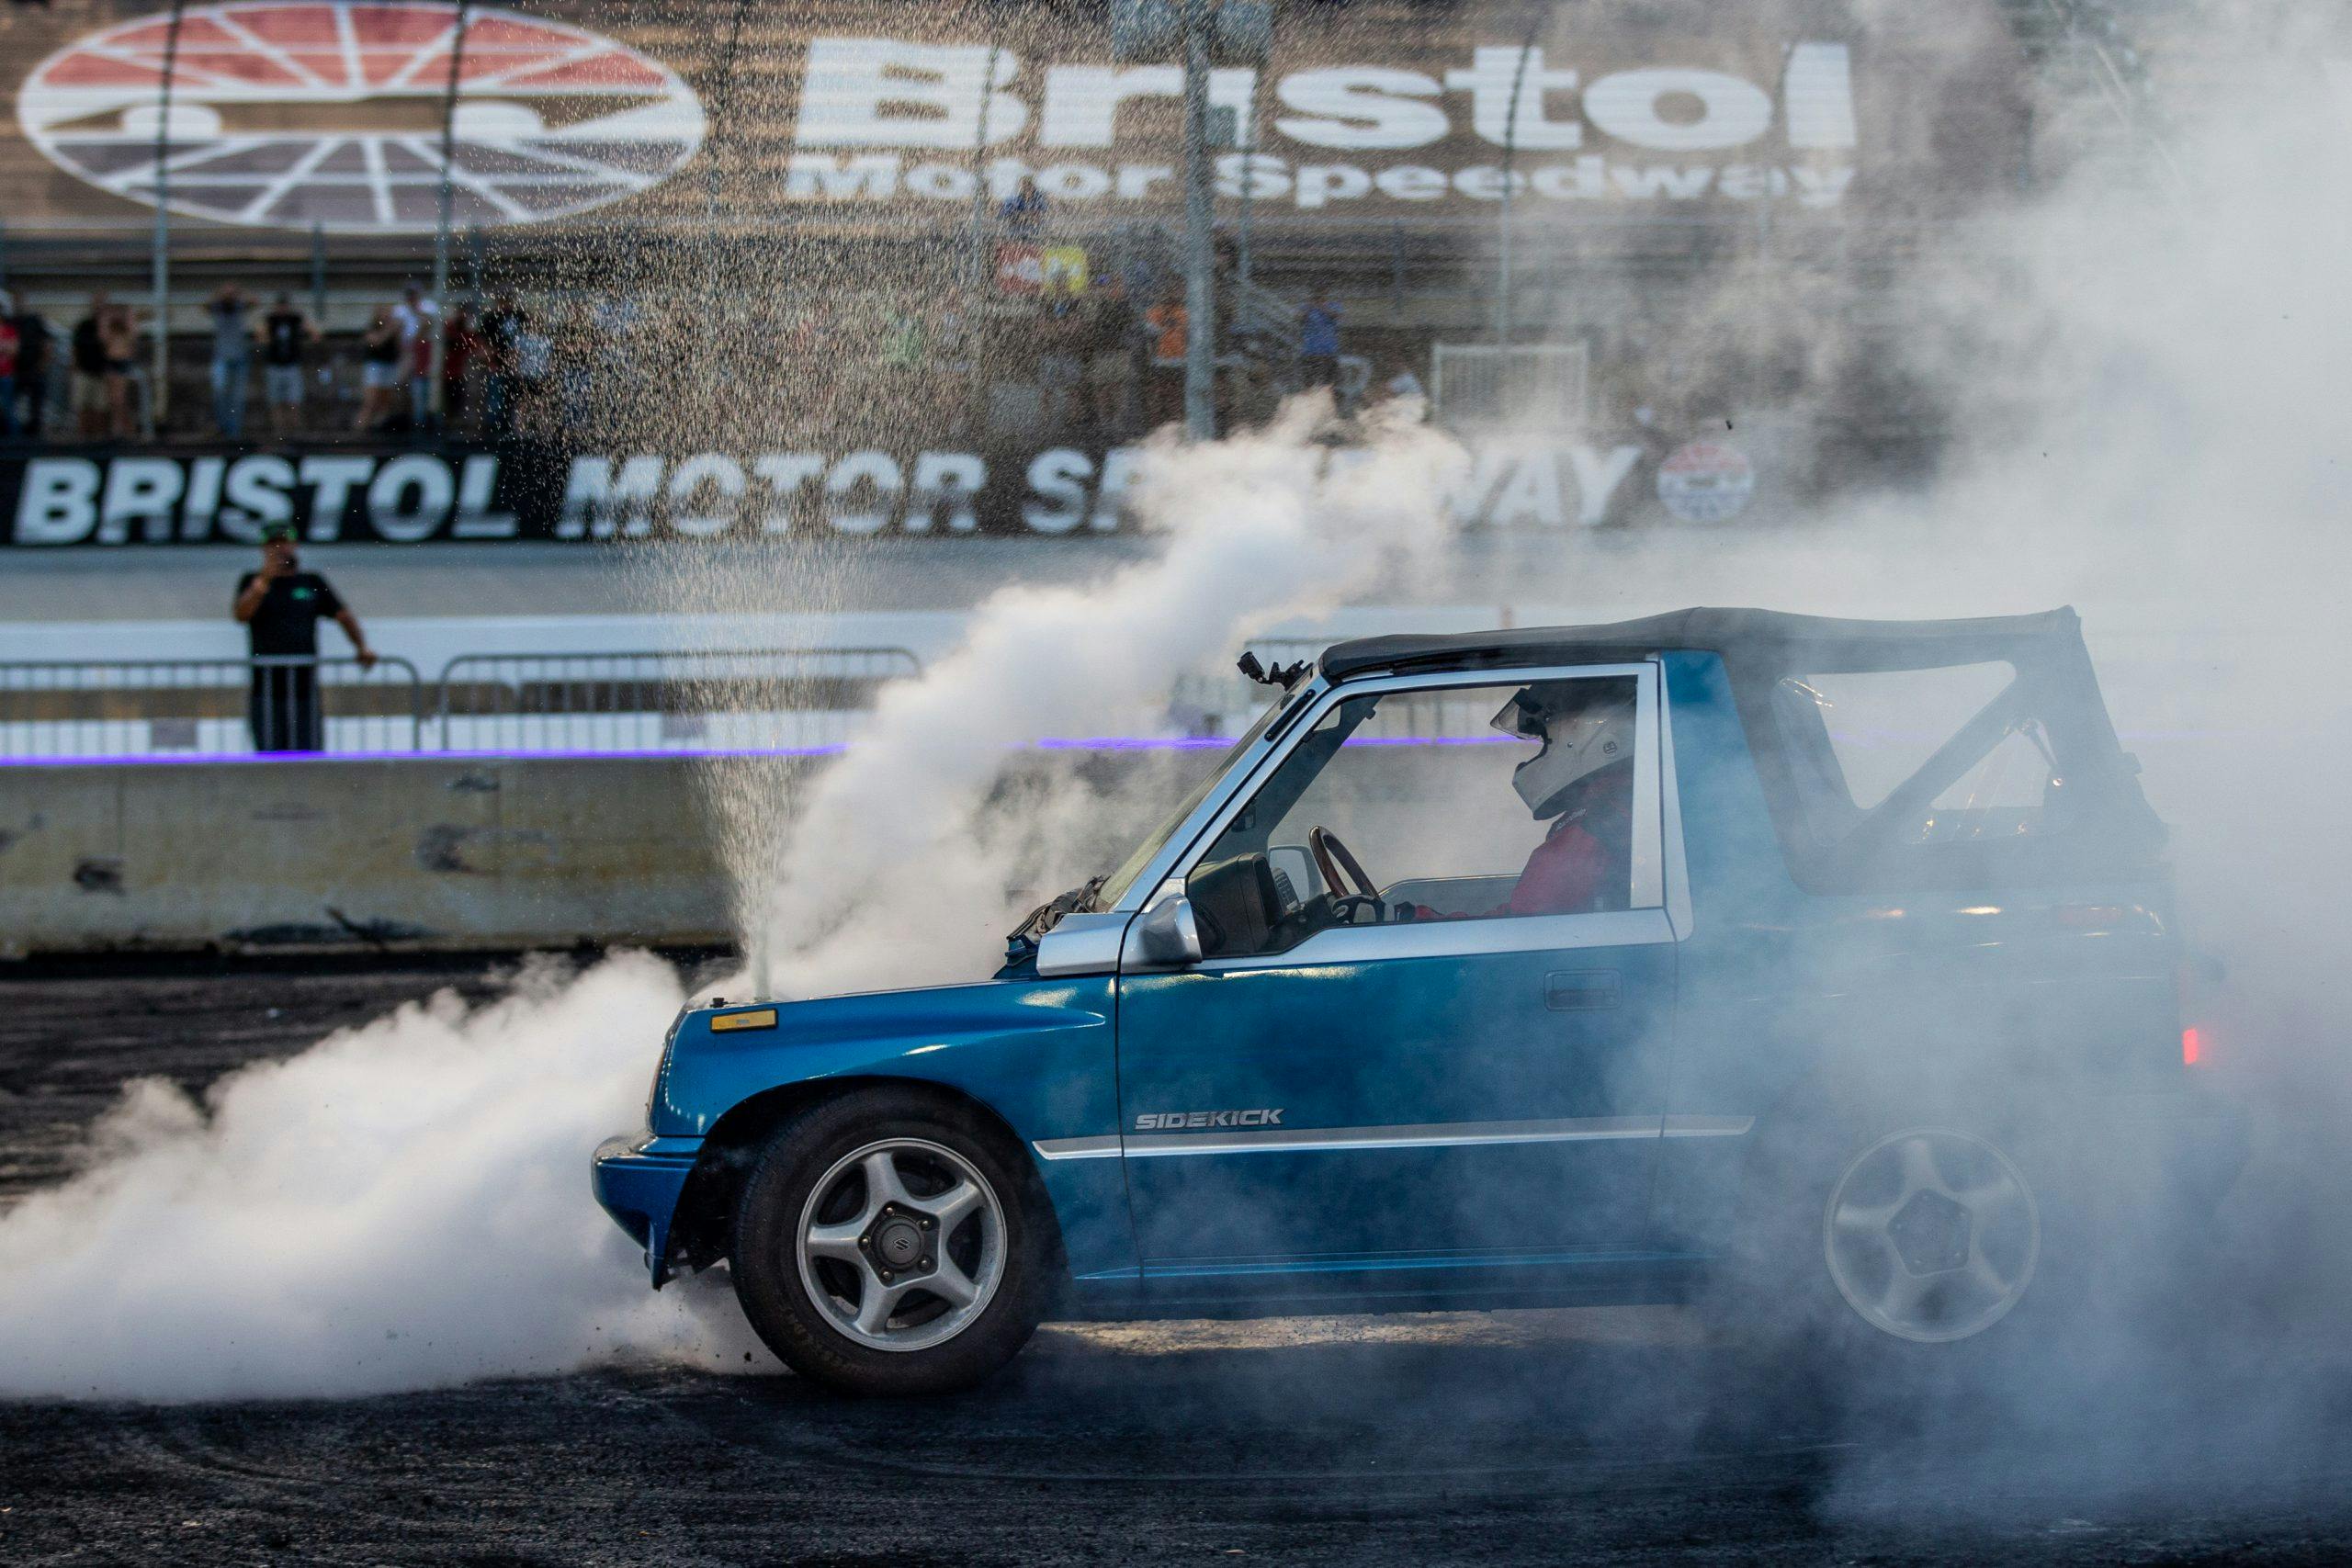 Burning rubber: the race to recreate Burnout